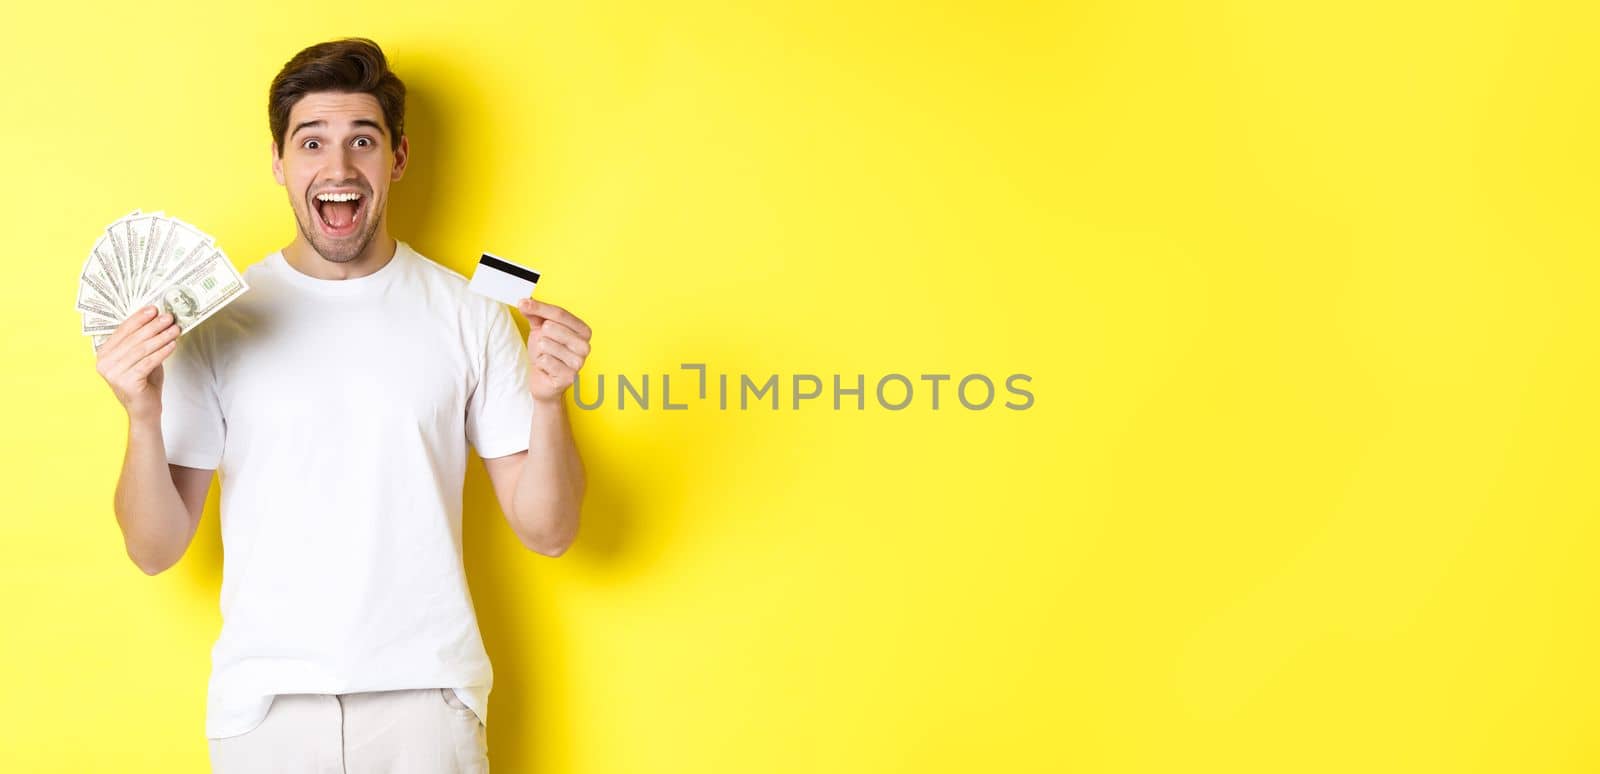 Excited man ready for black friday shopping, holding money and credit card, standing over yellow background.